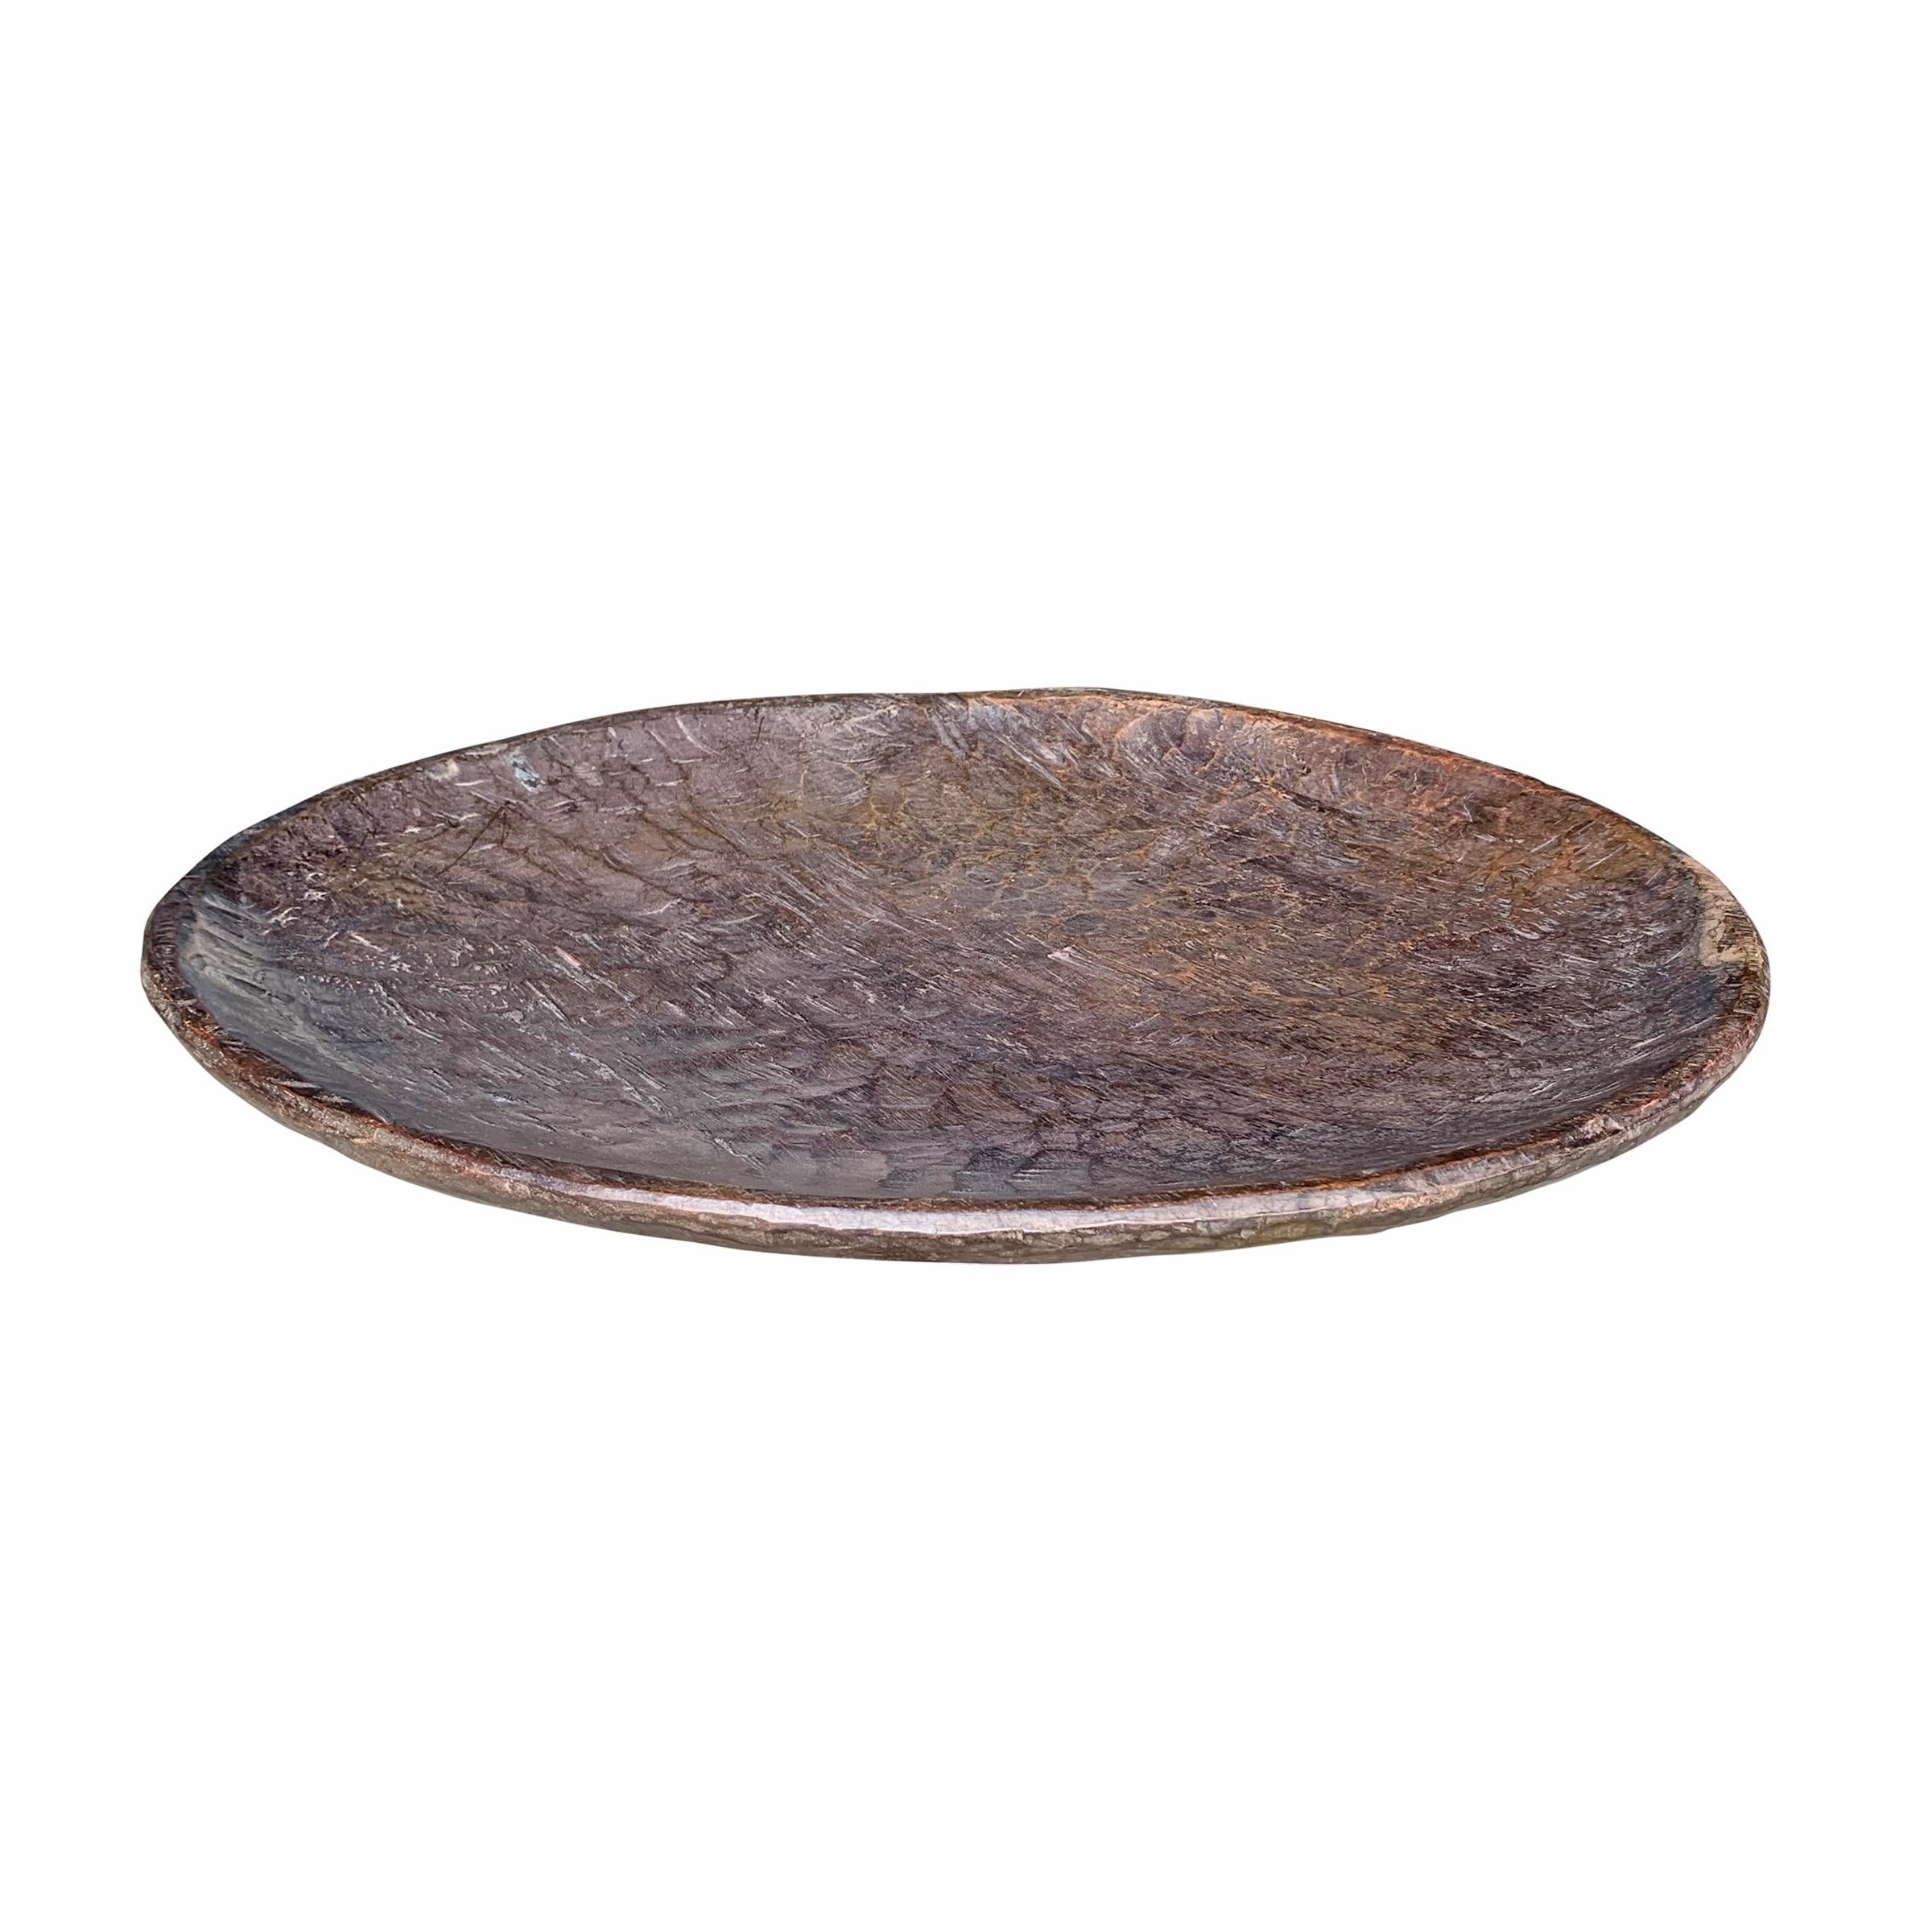 Hand-Carved Rather Large Early 20th Century East African Platter